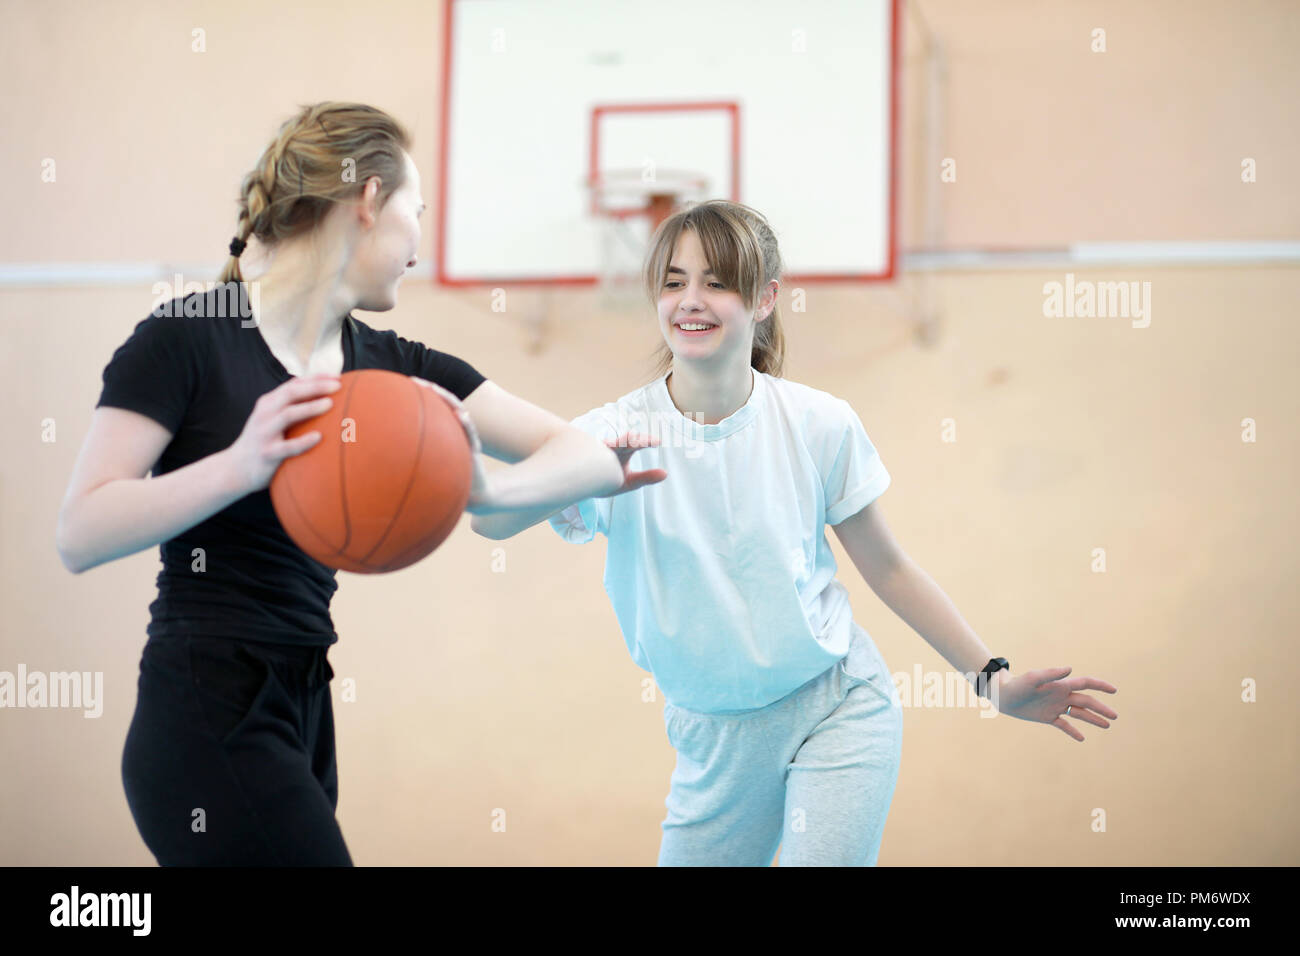 Girl In The Gym Playing A Basketball Stock Photo Alamy See inside the play gym by lovevery. https www alamy com girl in the gym playing a basketball image218969238 html